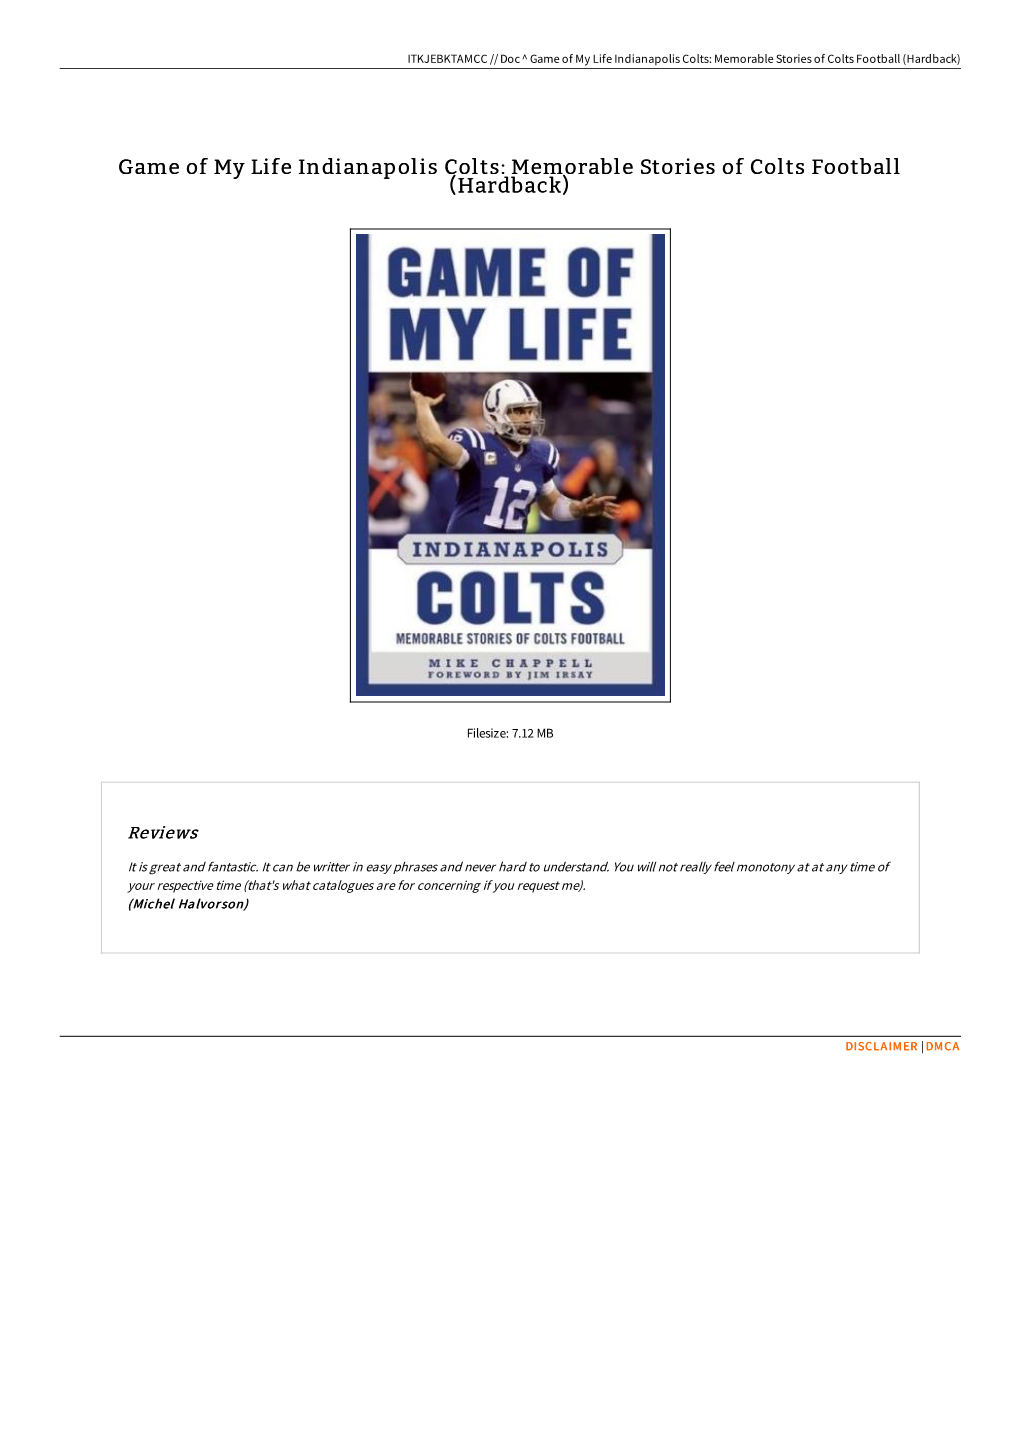 Game of My Life Indianapolis Colts: Memorable Stories of Colts Football (Hardback)